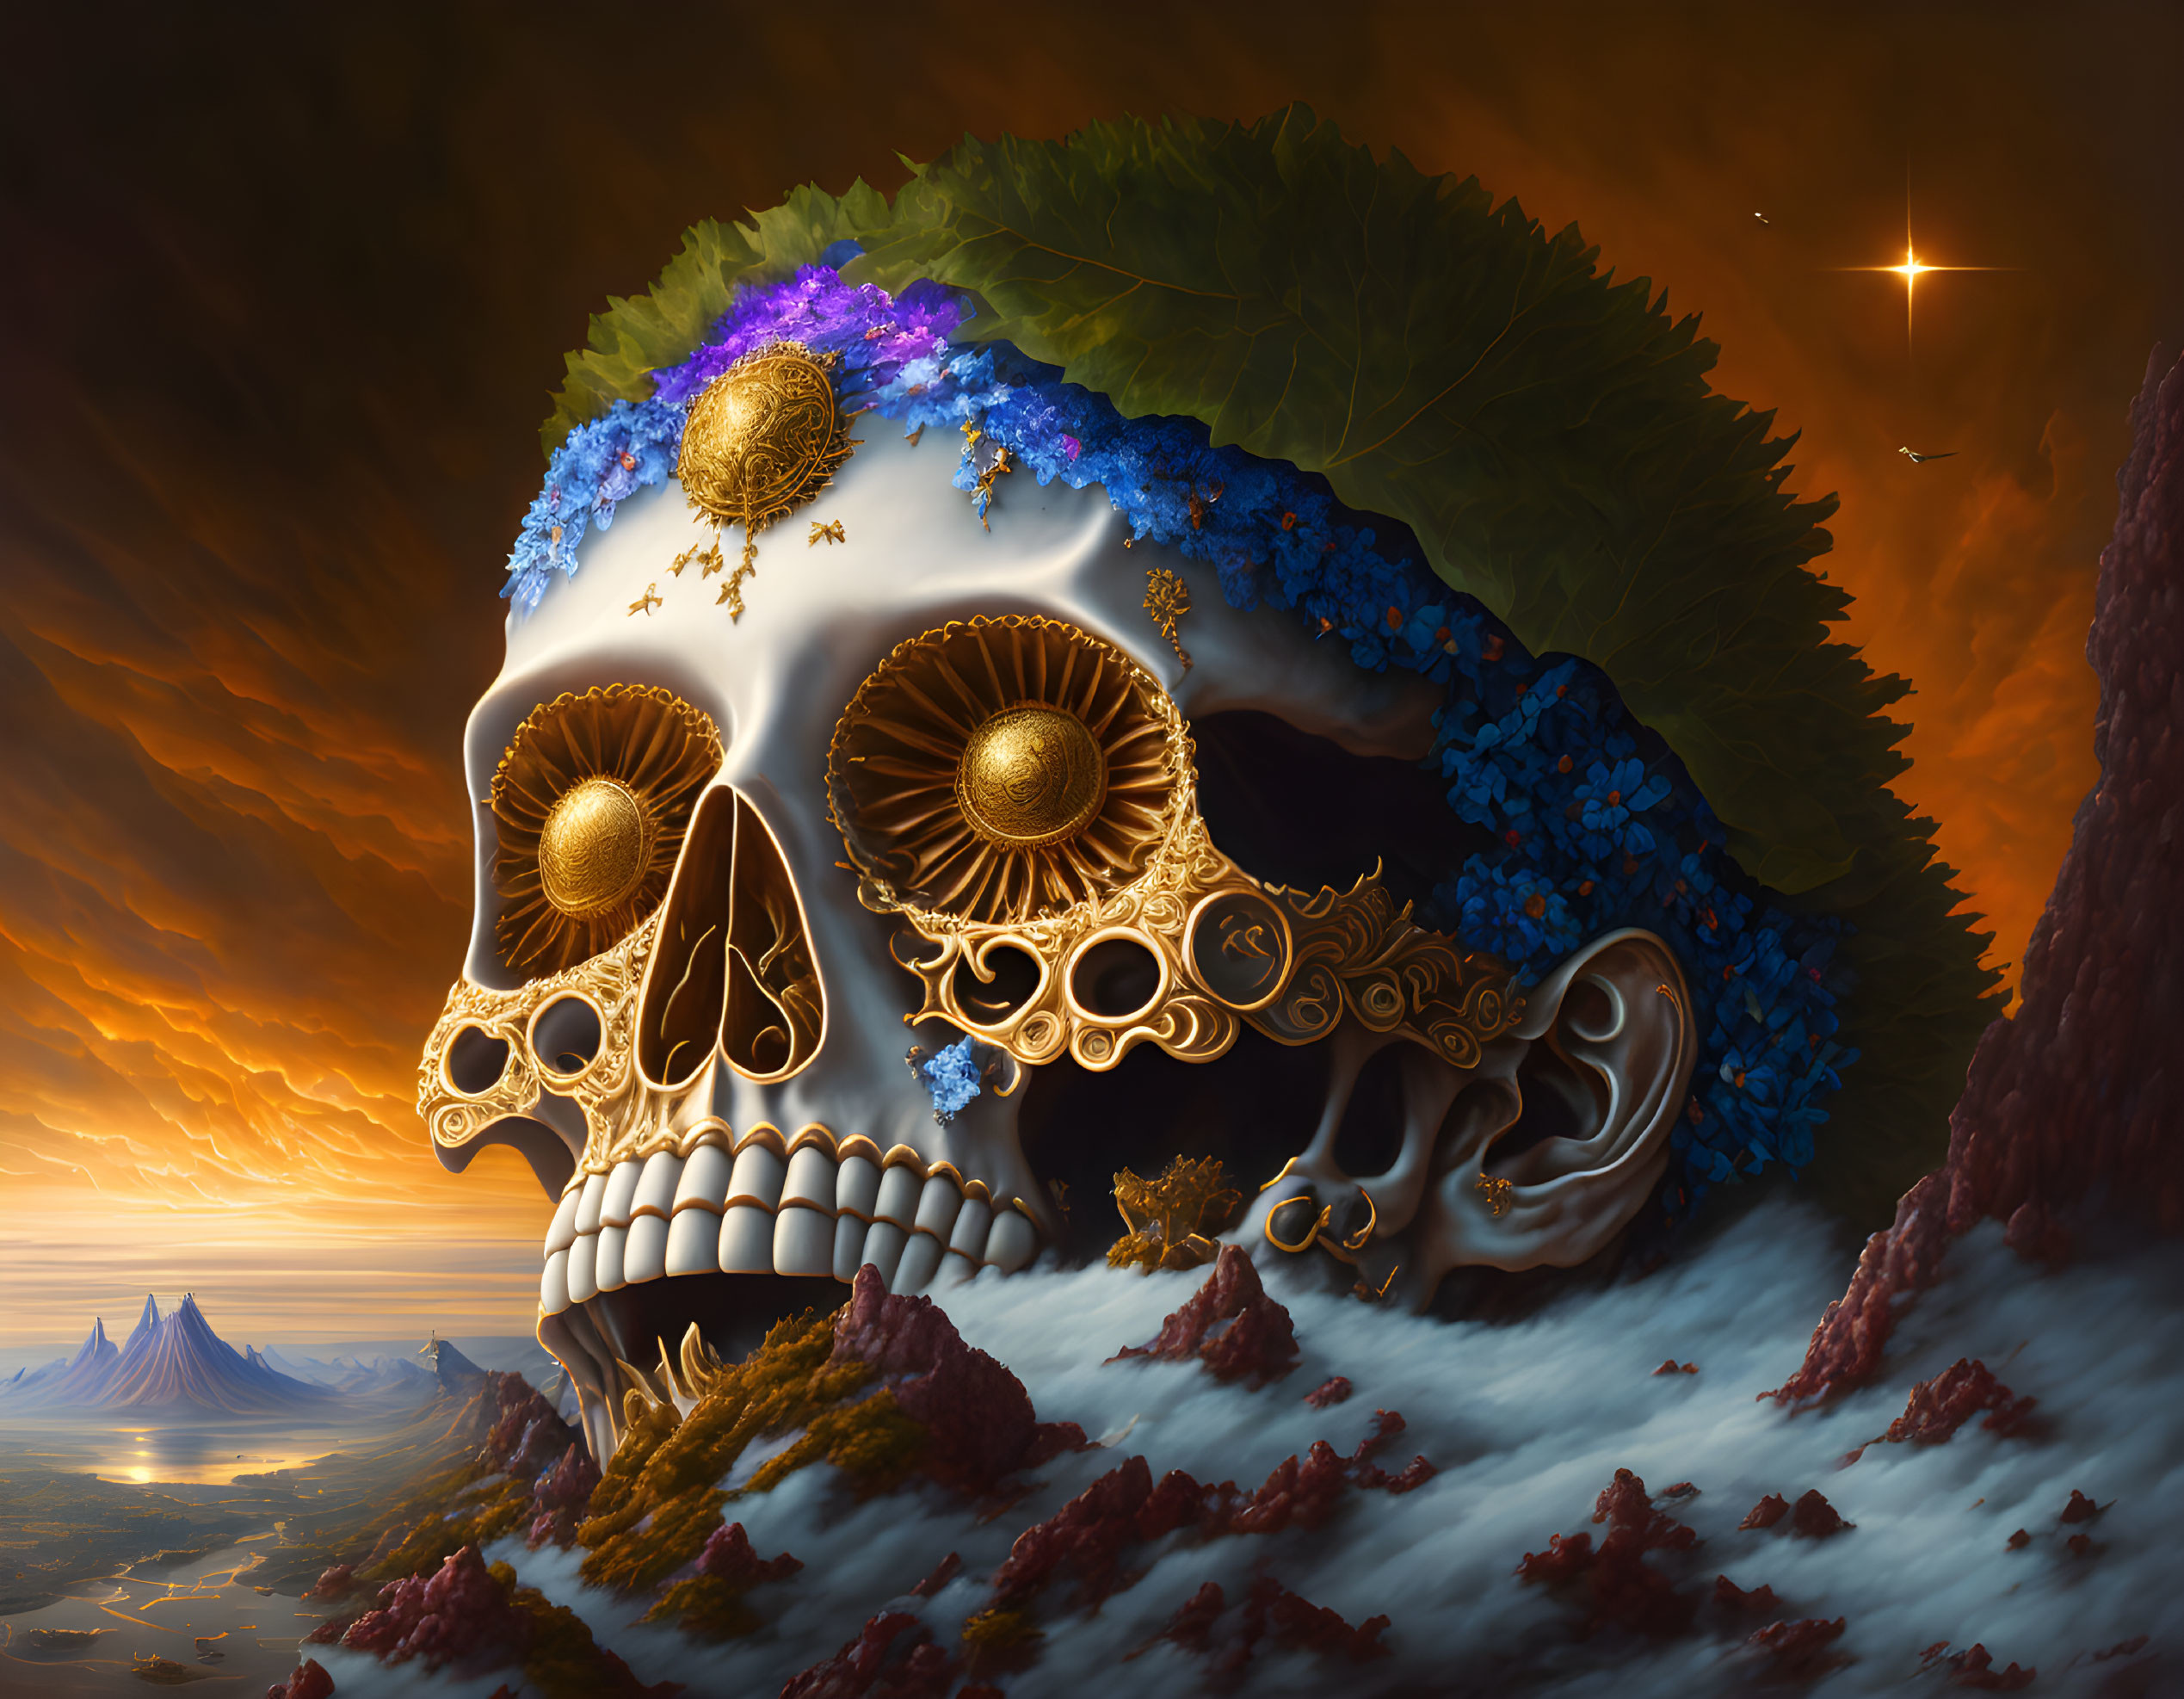 Decorated Skull with Golden Filigree and Floral Adornments in Surreal Landscape